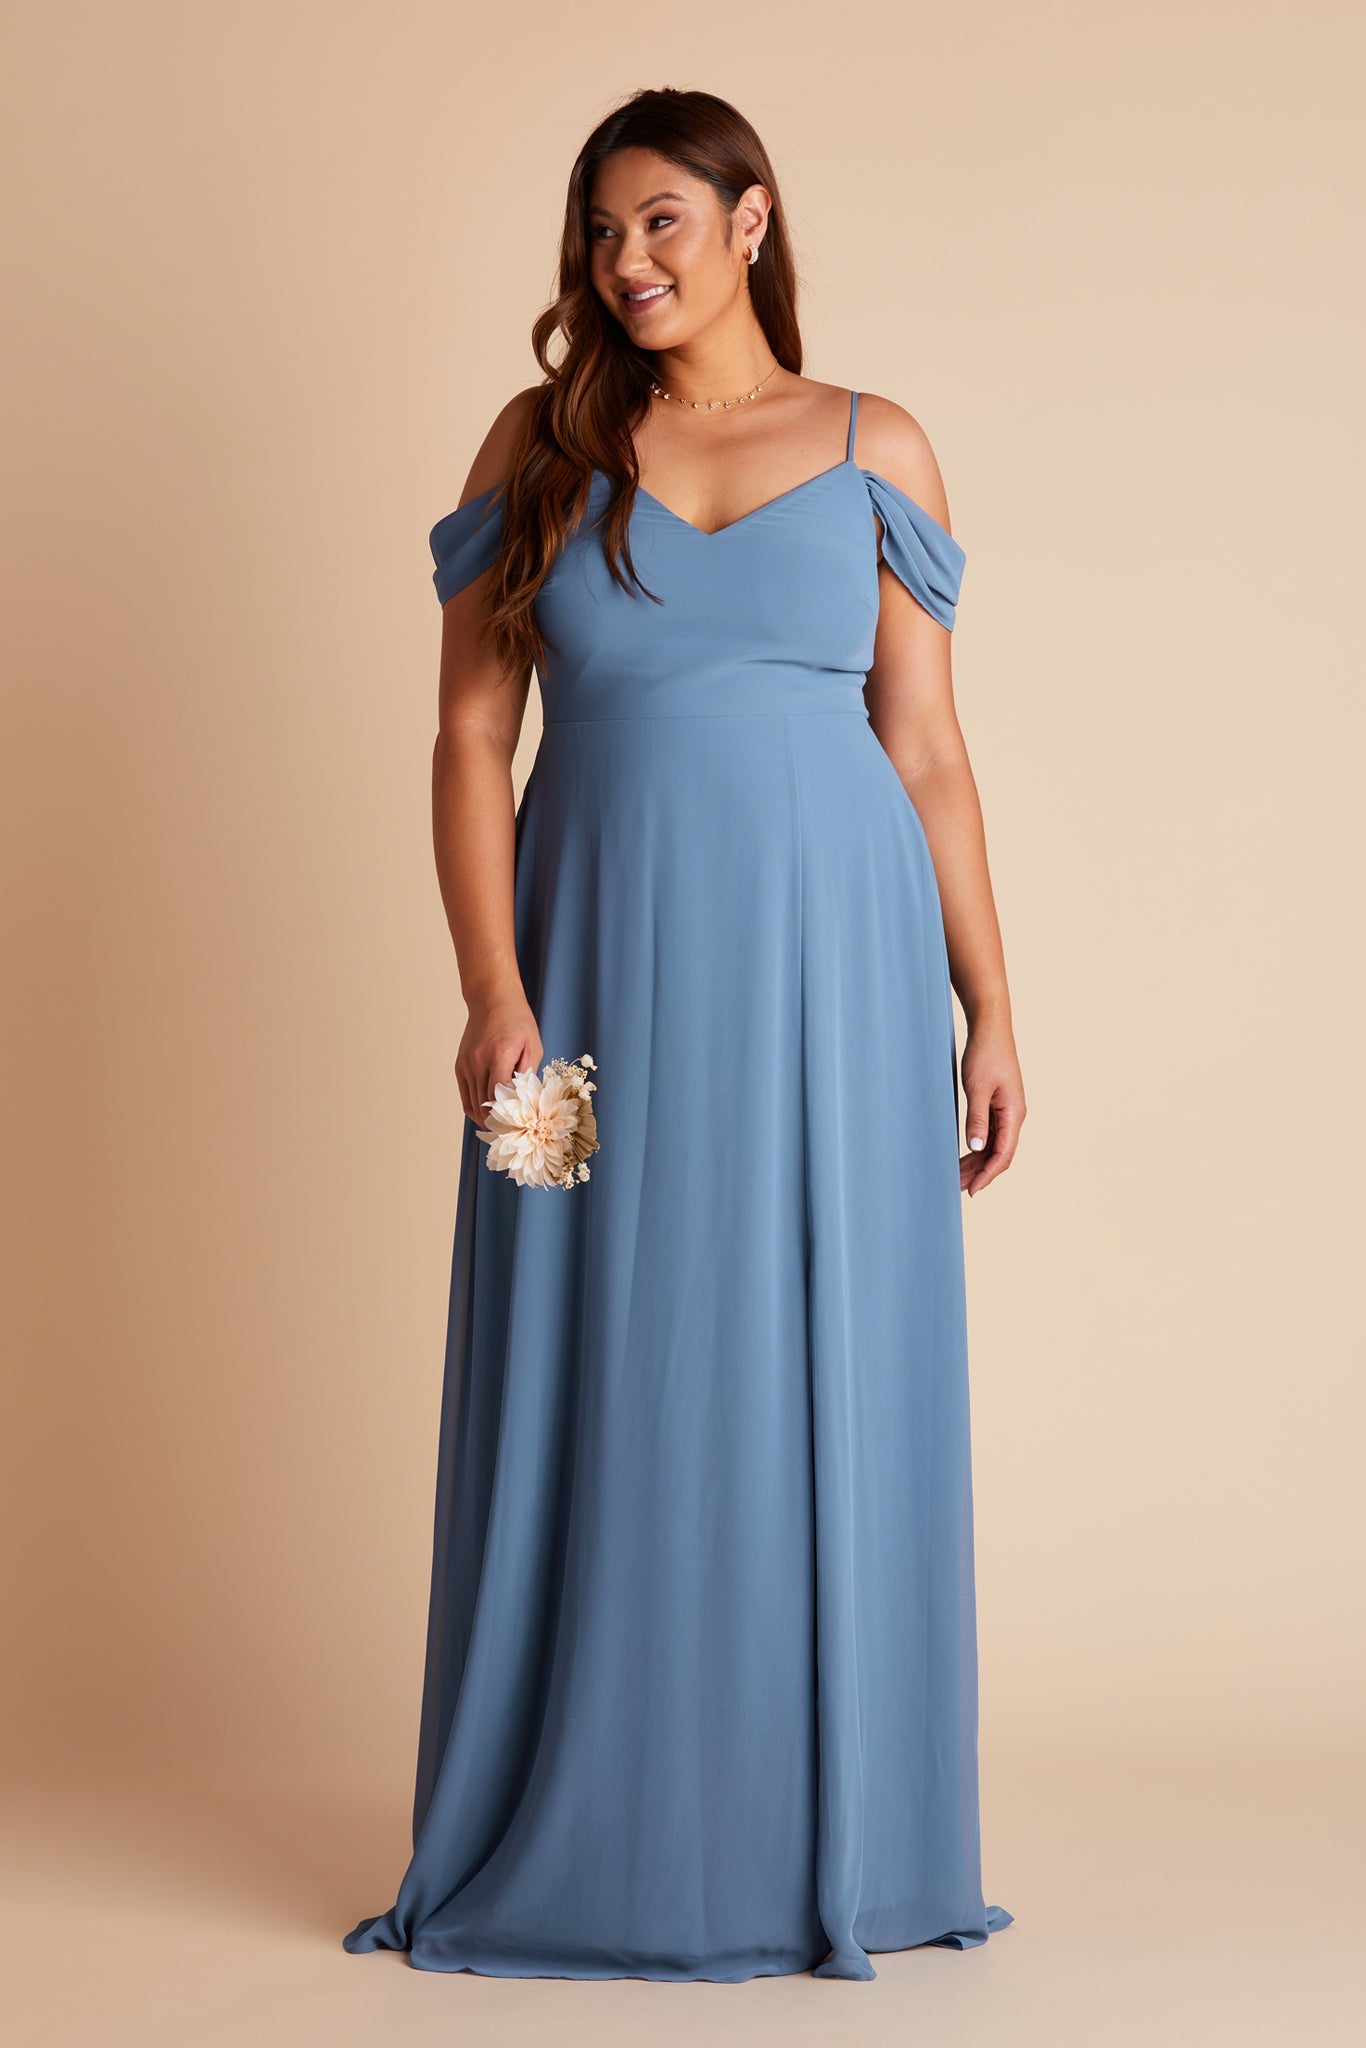 Devin convertible plus size bridesmaids dress in twilight blue chiffon by Birdy Grey, front view